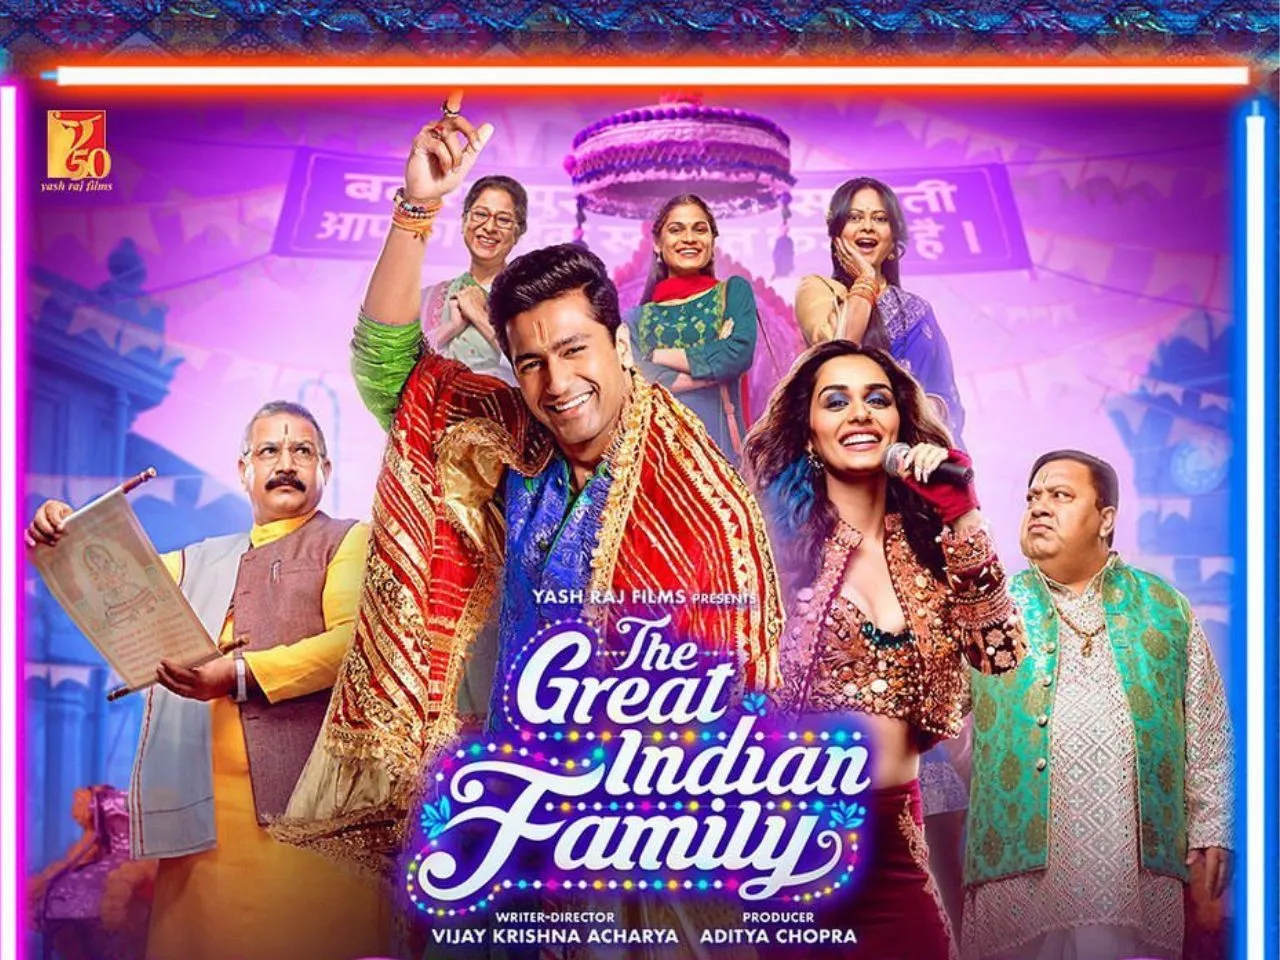 The Great Indian Family review: Predictable but fun and simple with a genuine sociopolitical message